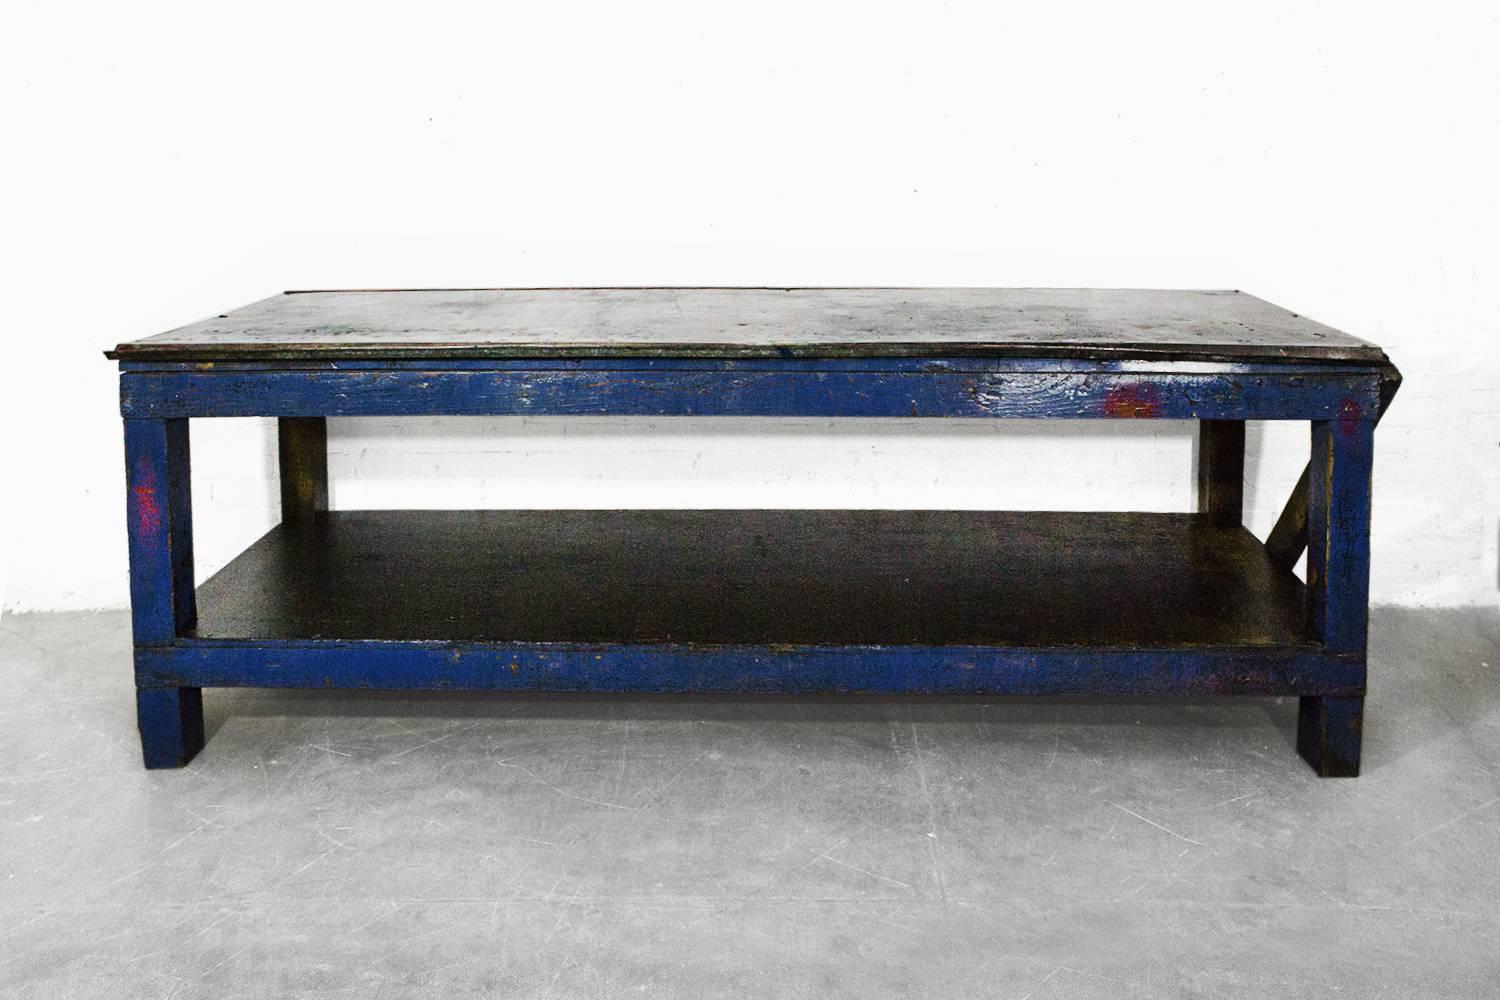 Killer 8 foot machine age workbench. Nicely distressed blue paint with galvanized metal top. This baby has been ridden hard and put up wet. Still solid as a rock. Great work table or merchandising display.

Dimensions: 32